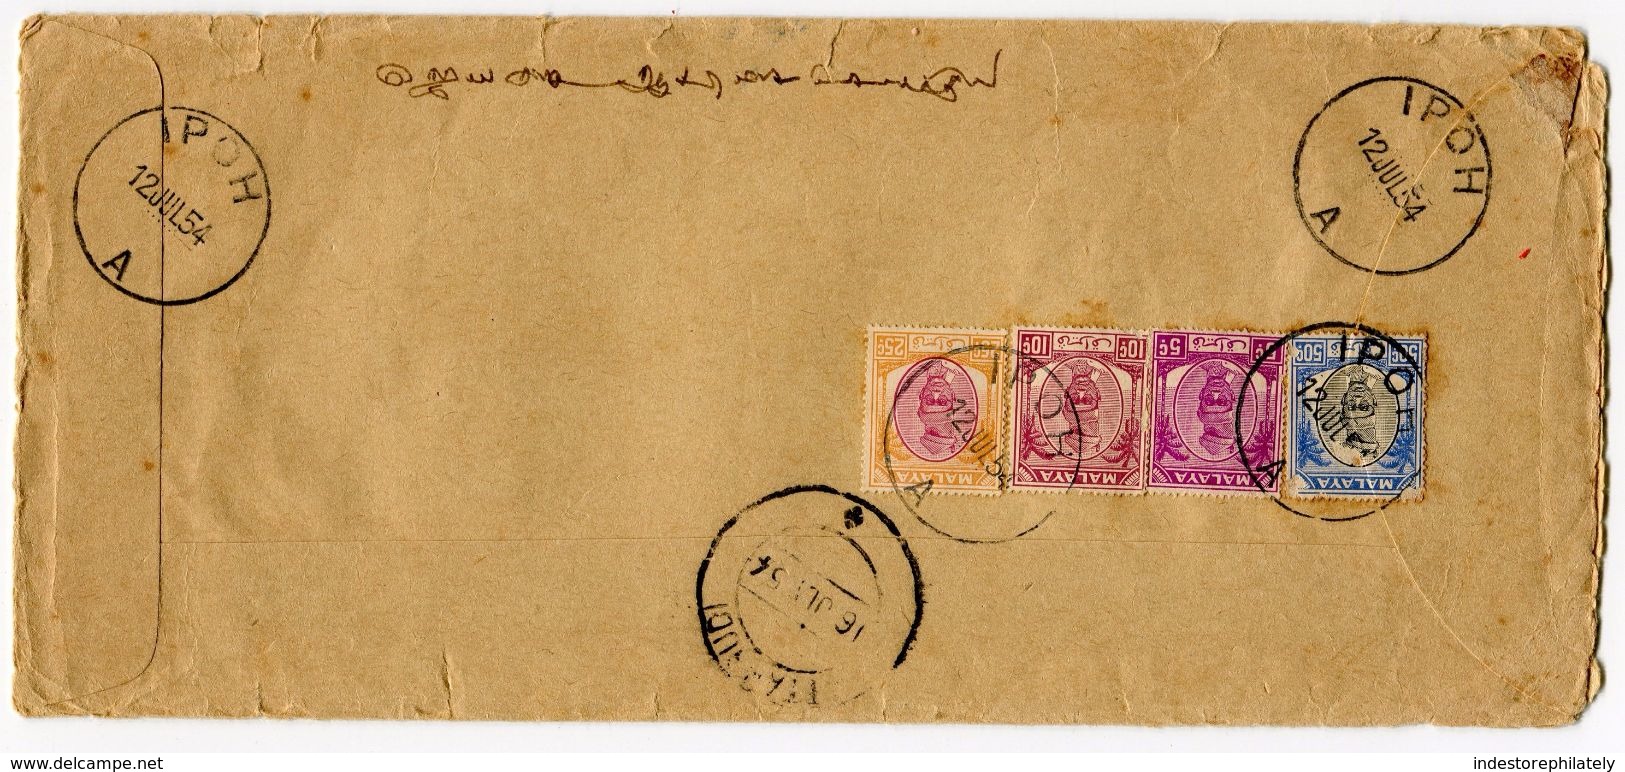 MALAYA Registered Letter 1680, Ipoh To South India, 12 July 1954 (M19) - Perak